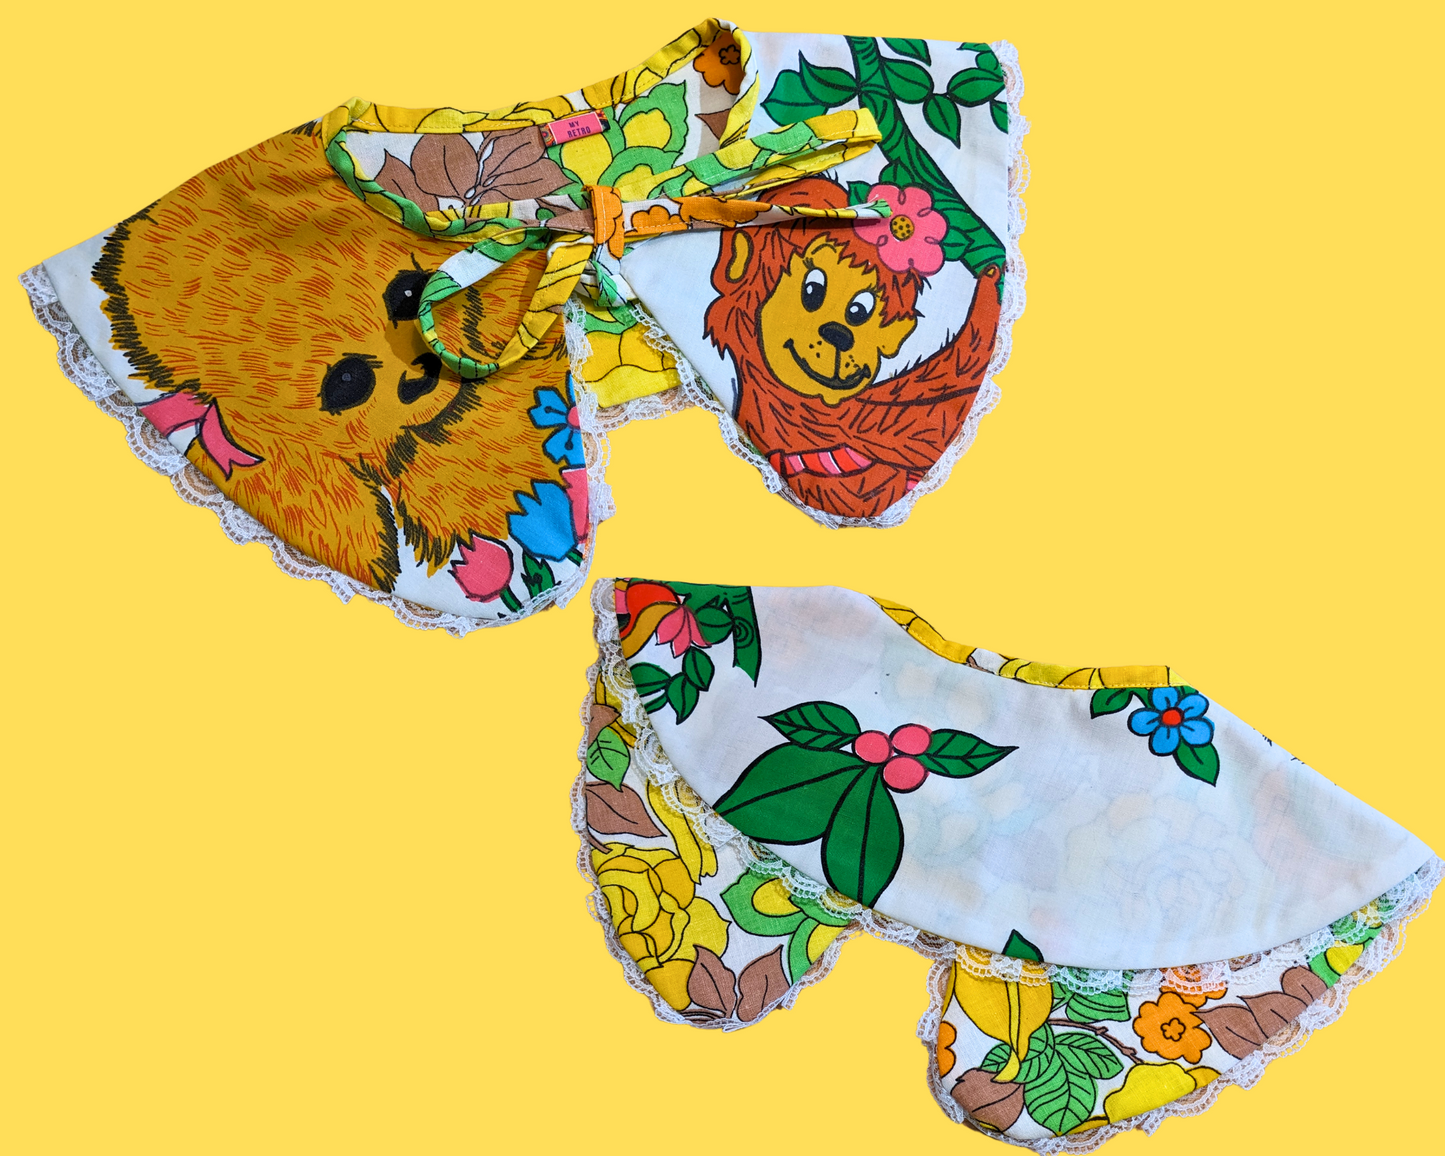 Handmade, Upcycled, Reversible Pilgrim Collar with Lace Frill Made With Groovy Animals Bedsheets